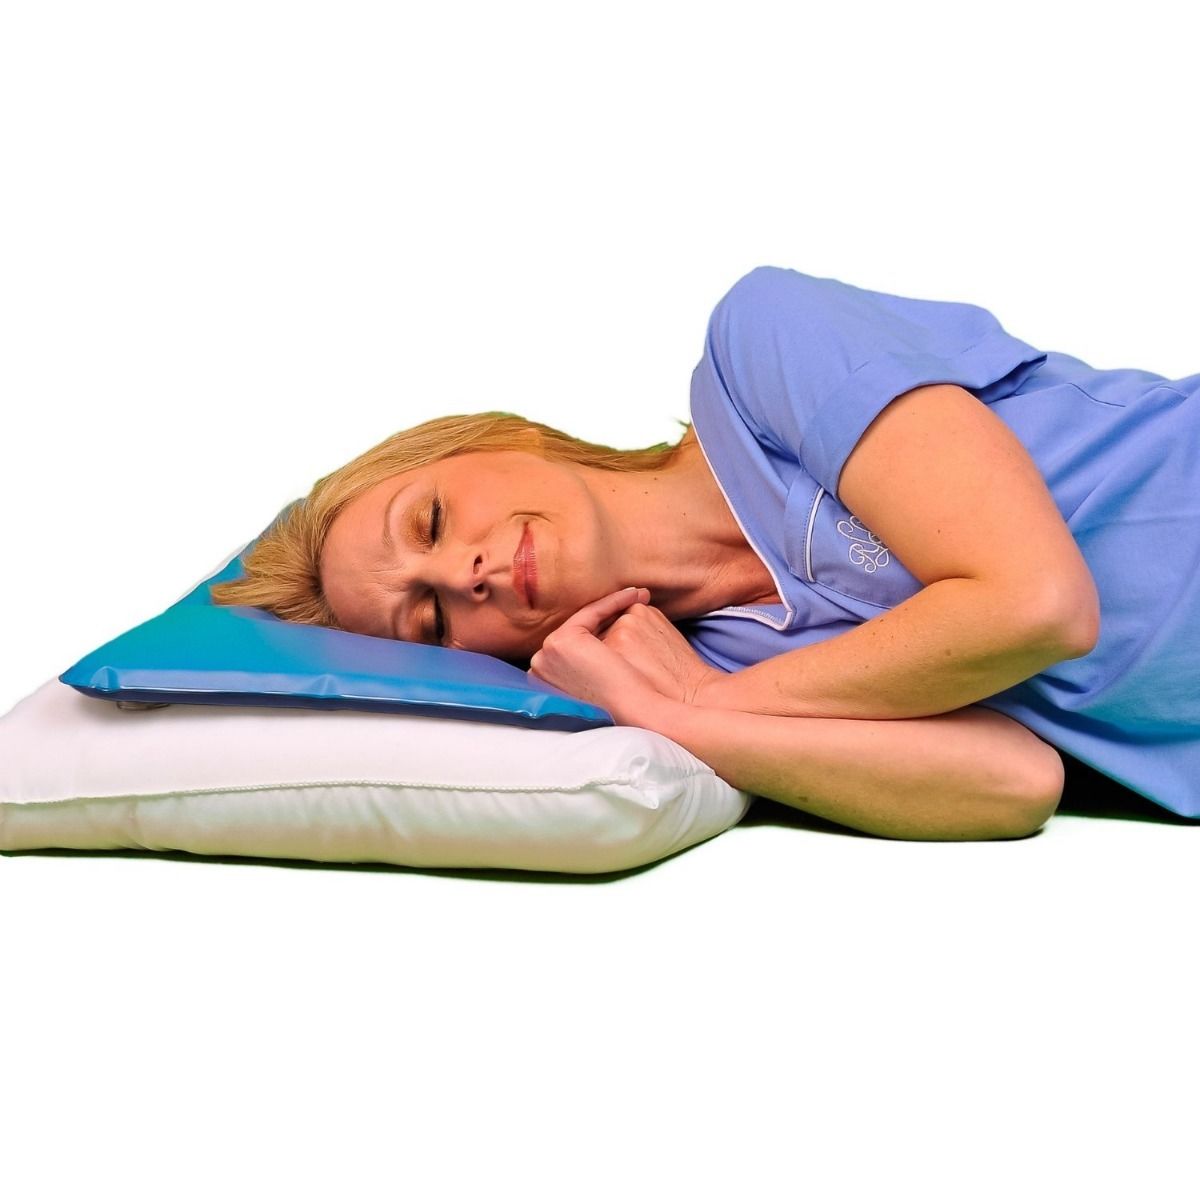 Honana WX-P3 Pillow Cooling Pad Sleeping Therapy Insert Comfort Aid Mat Muscle Relief Cooling Pillow